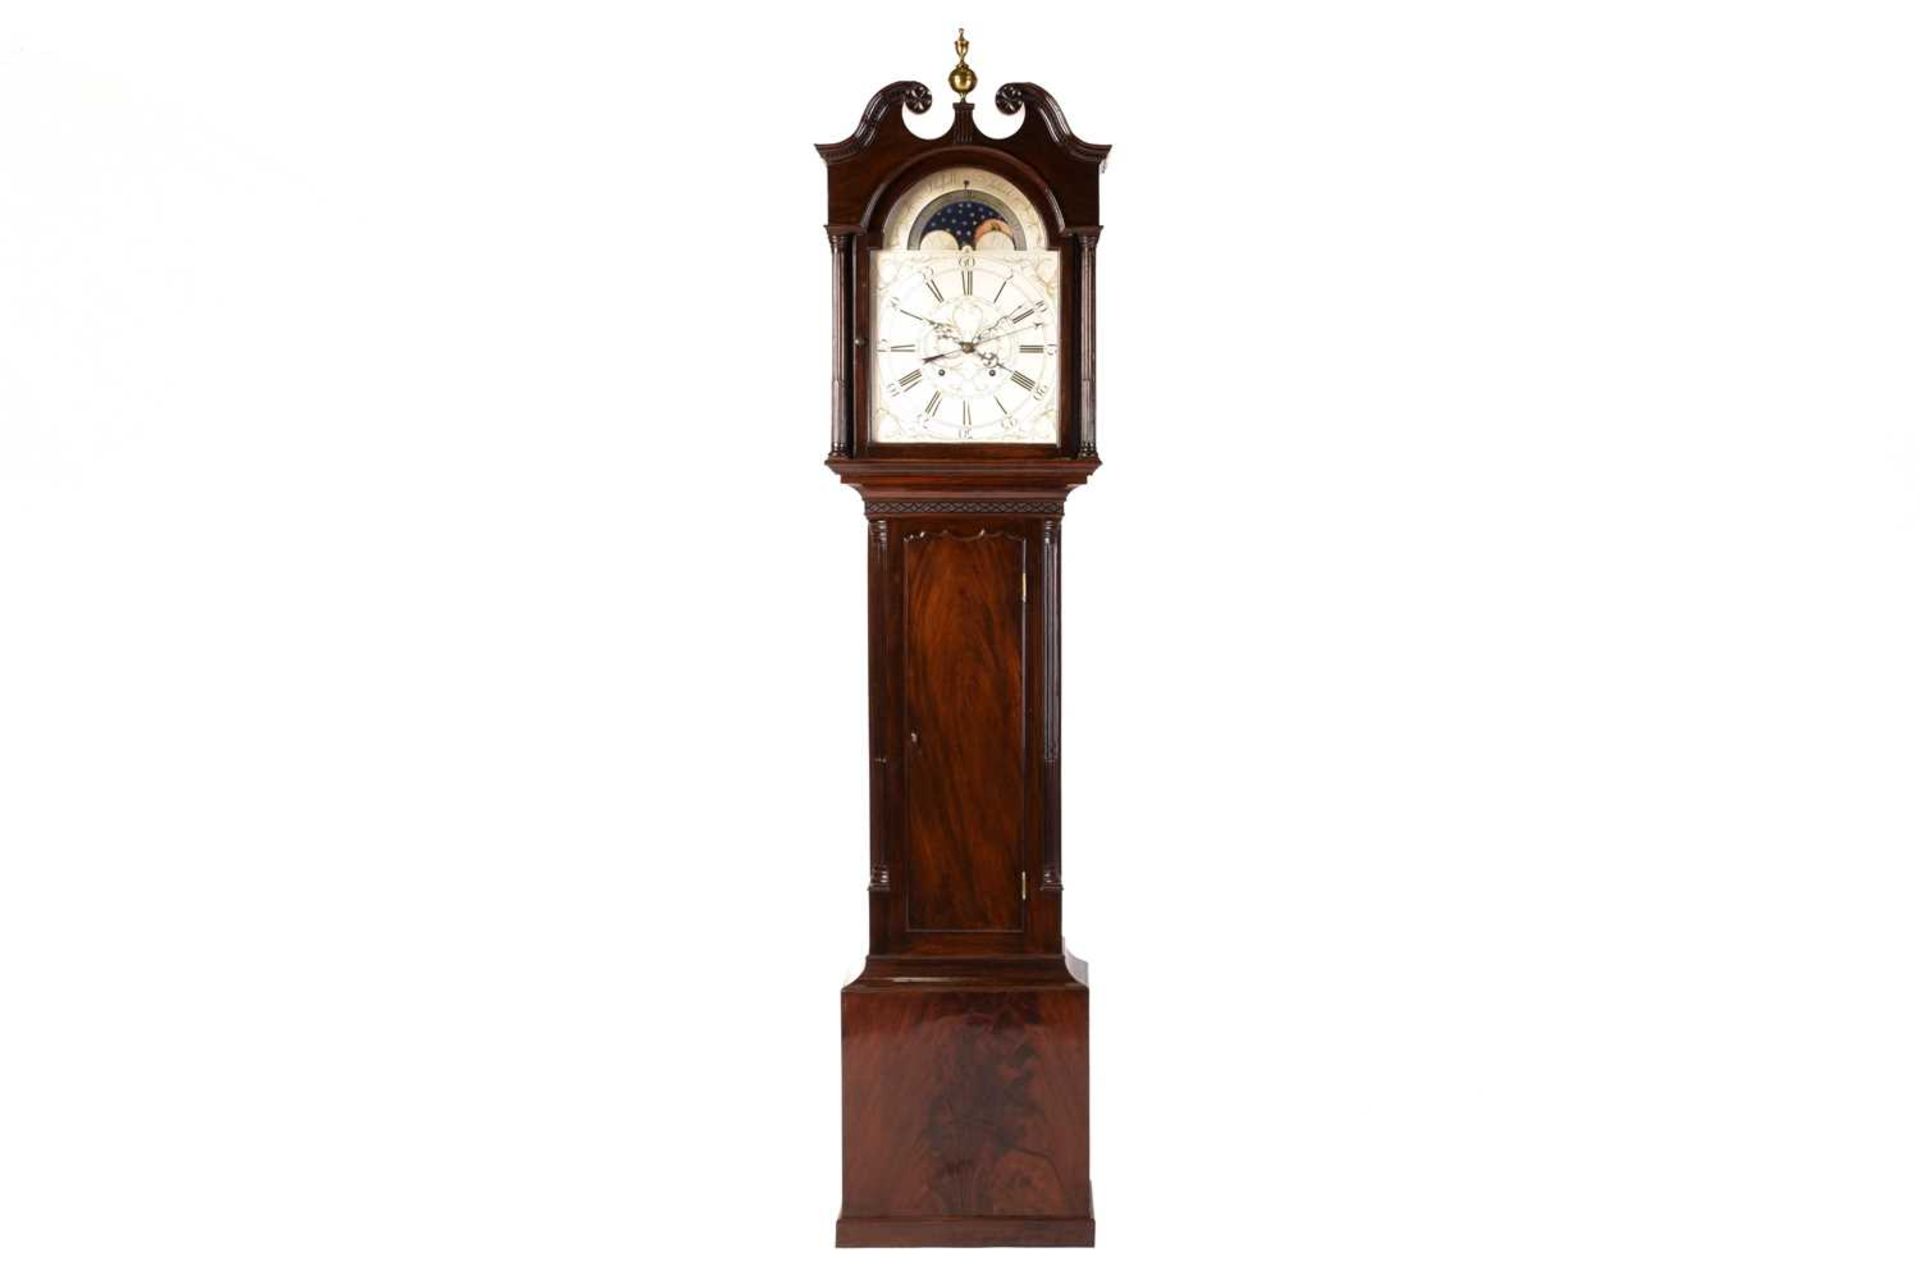 John Russell of Falkirk; A George III mahogany-cased 8-day longcase clock, the one-piece silvered